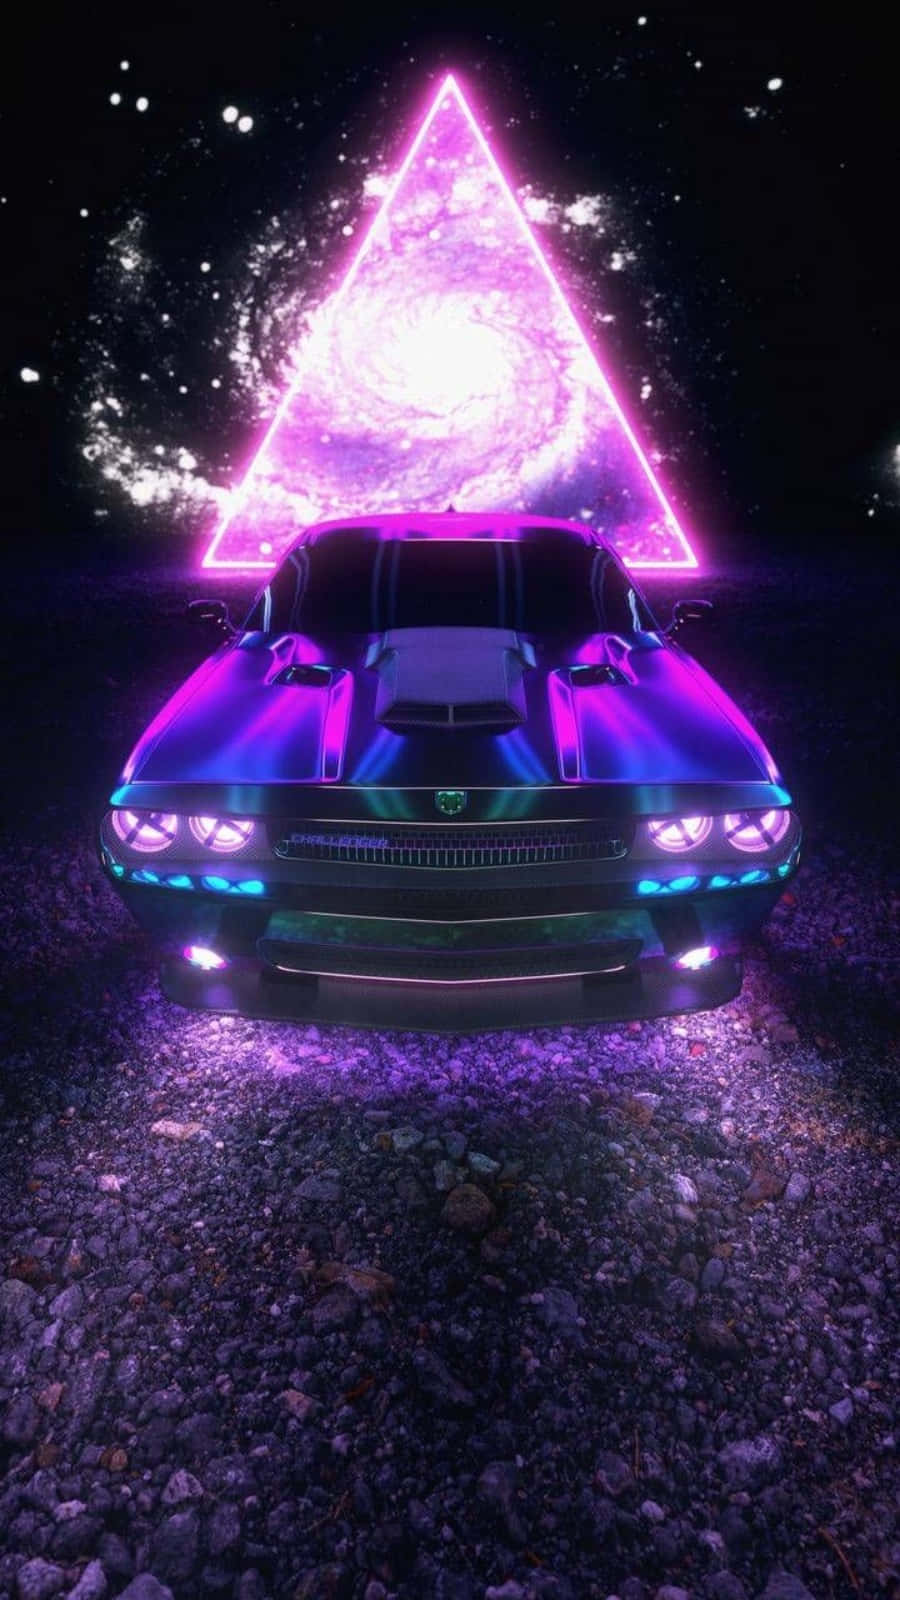 A Car With A Purple Triangle In The Background Wallpaper